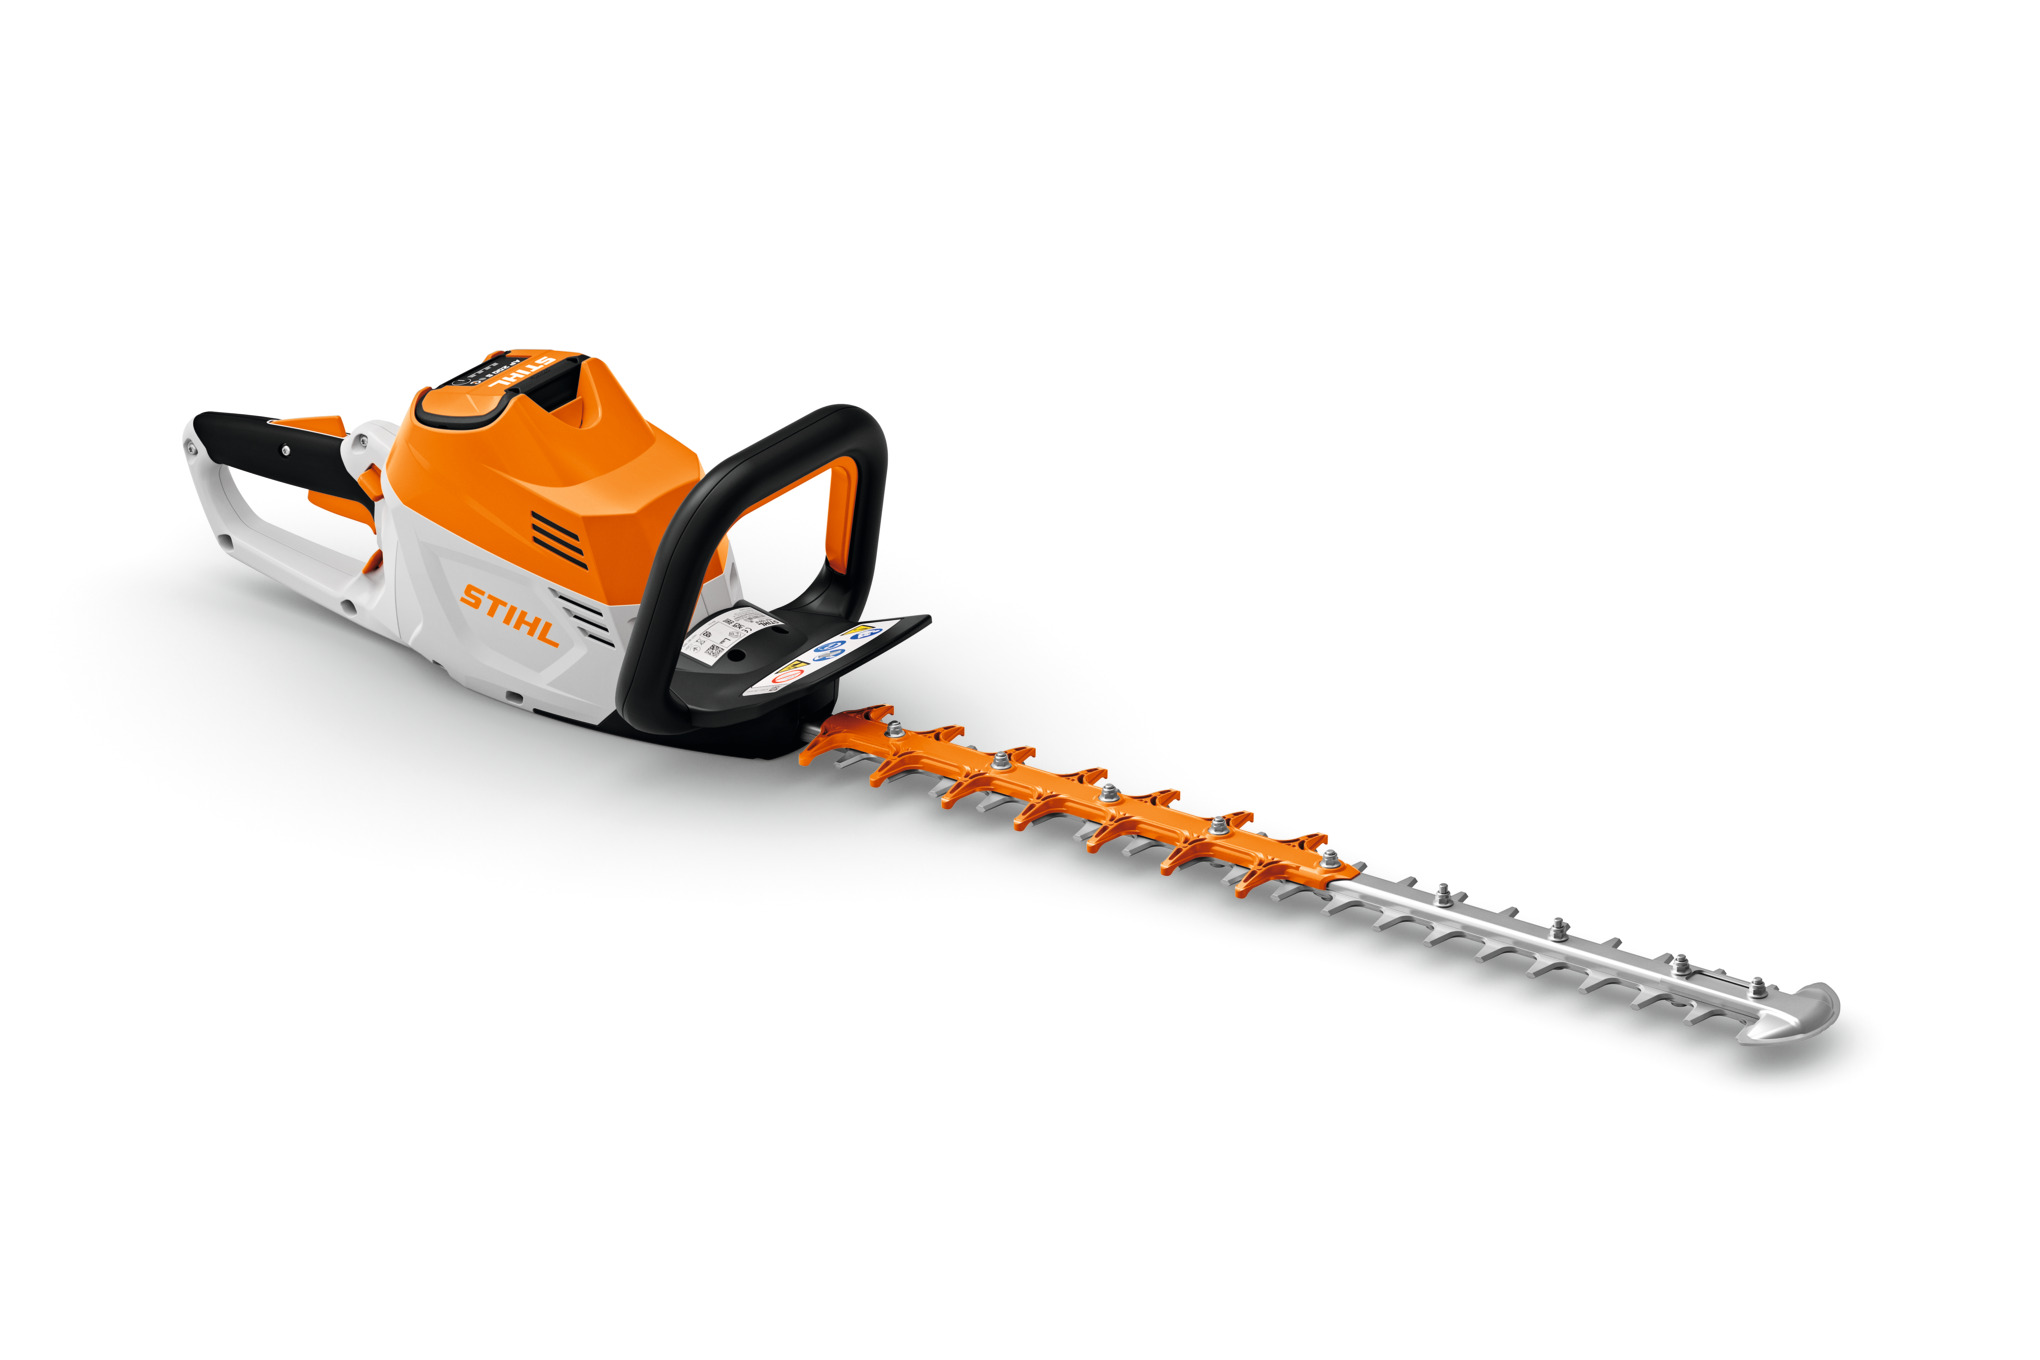 STIHL HSA 94 cordless hedge trimmer from the AP-System